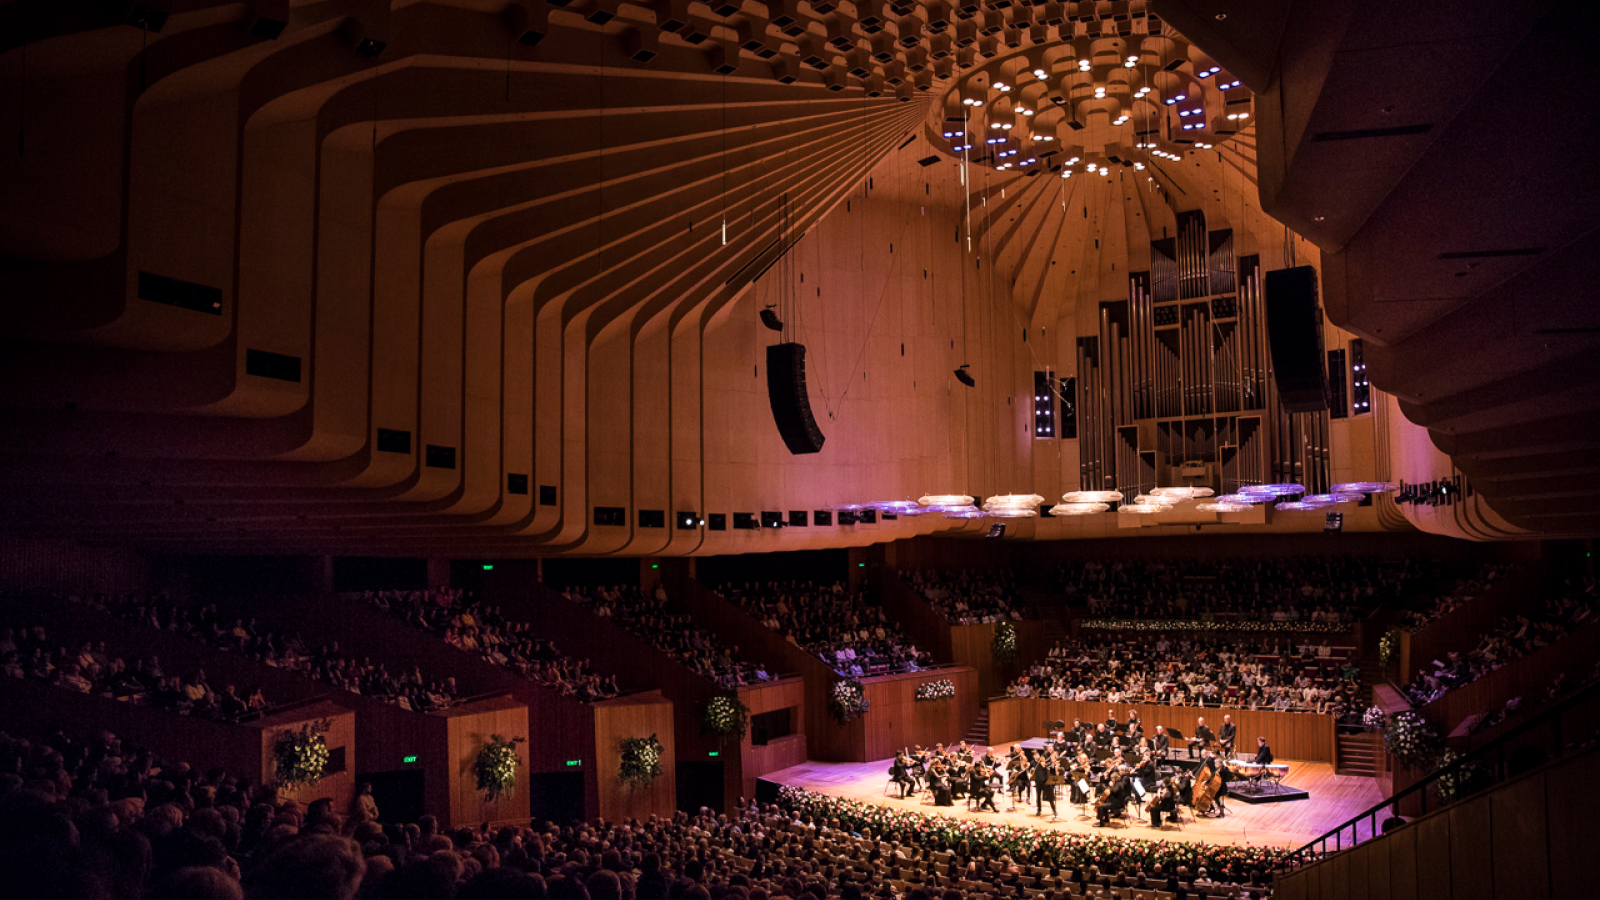 An orchestra performing on stage in the Concert Hall as viewed from the back of the Hall.